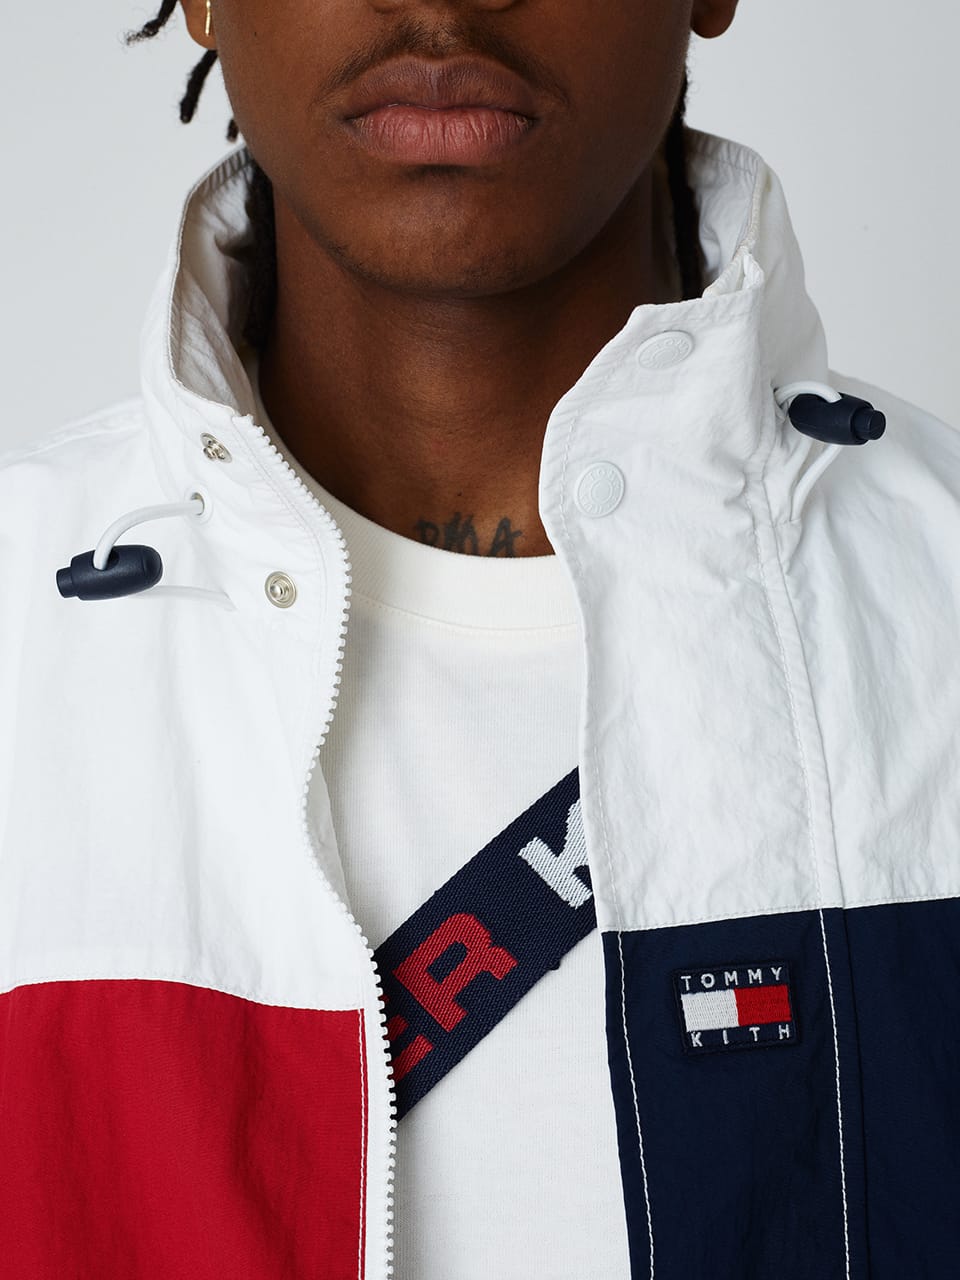 Kith X Tommy Hilfiger Deals, 50% OFF | empow-her.com